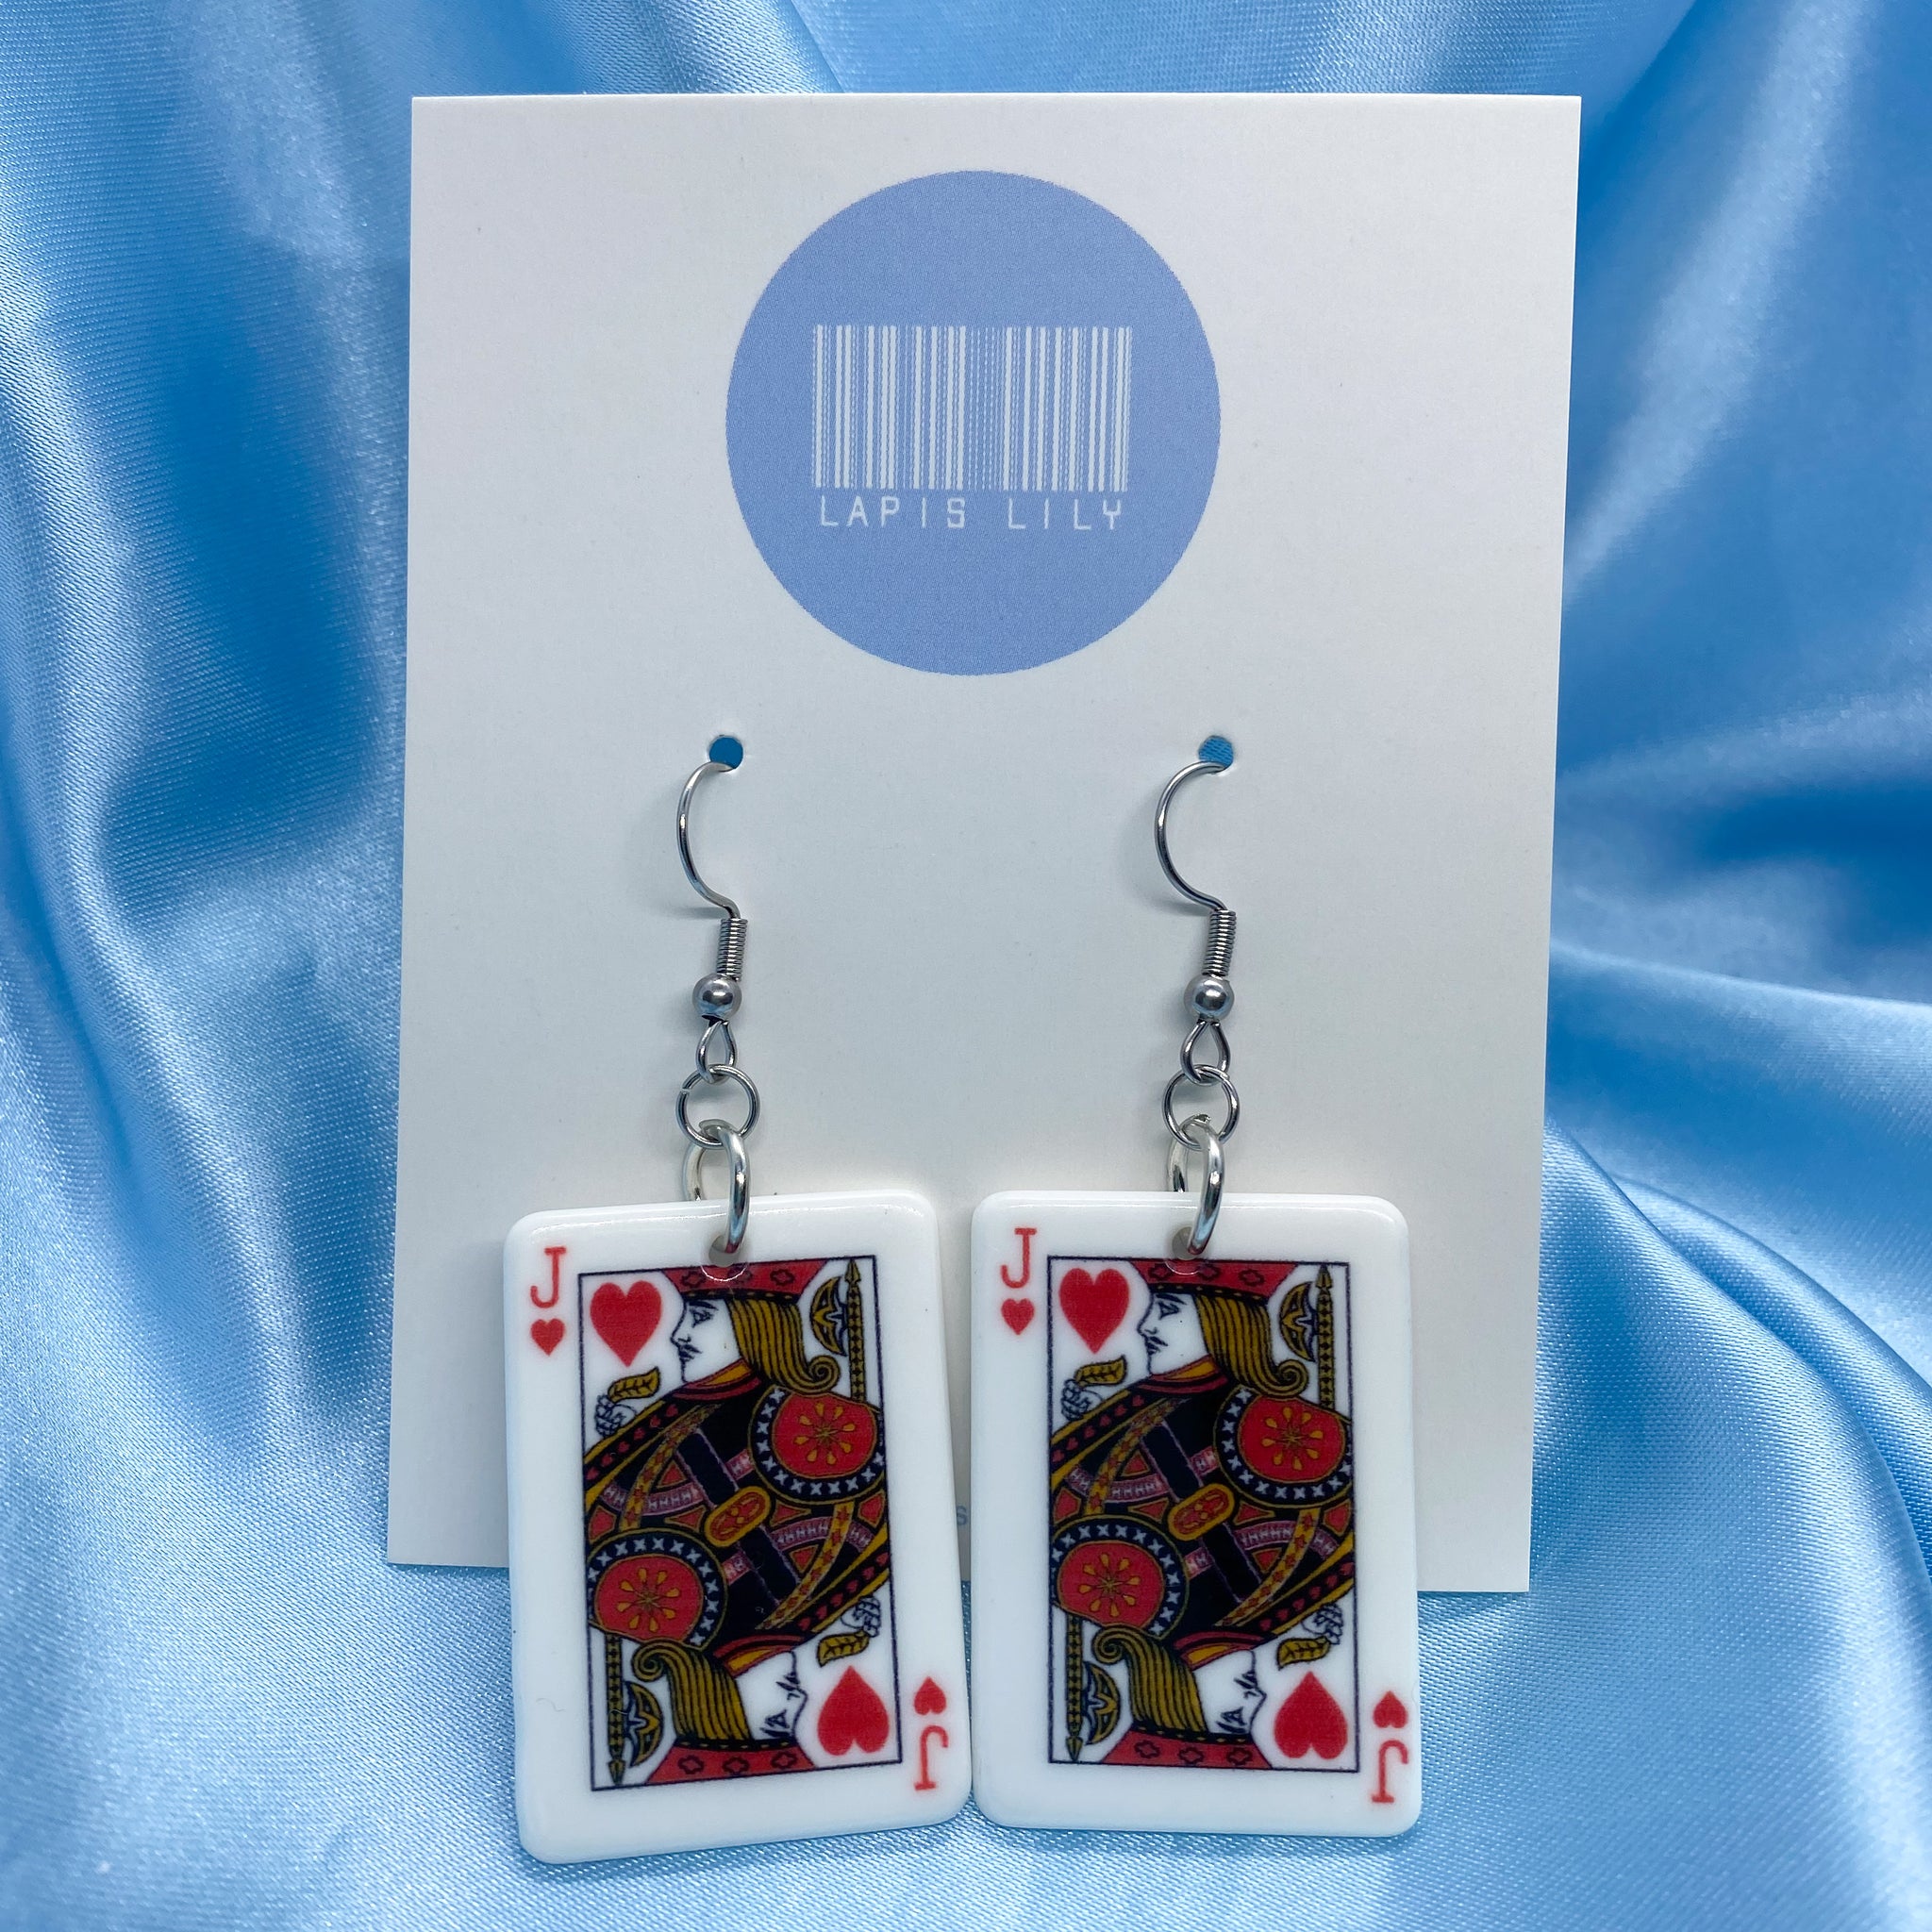 Jack playing card earrings with stainless steel earring hooks, clip ons, s925 sterling silver earring hooks